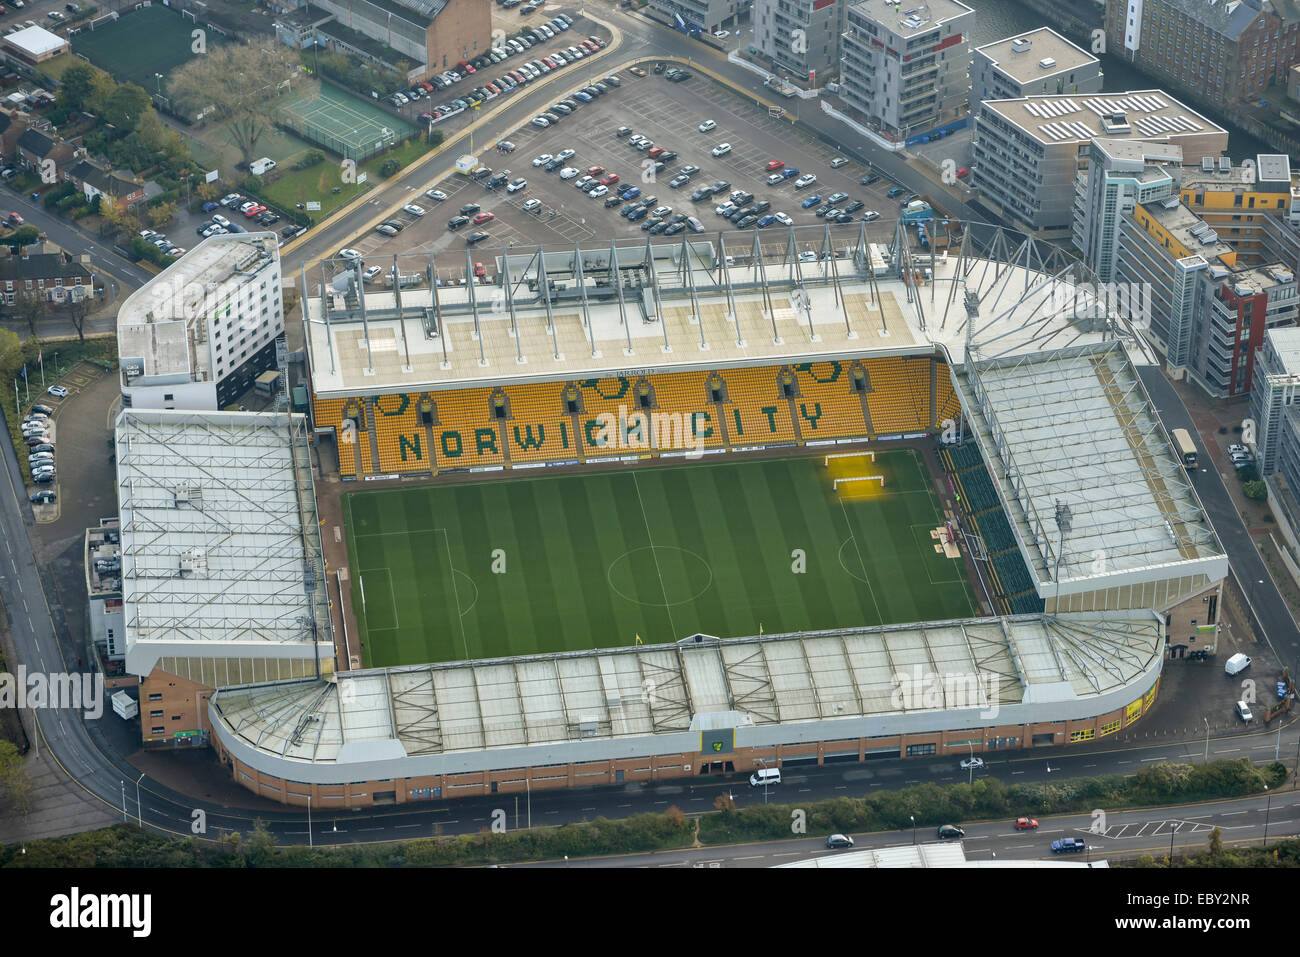 An aerial view of Carrow Road football stadium, home of Norwich City Football Club. Stock Photo